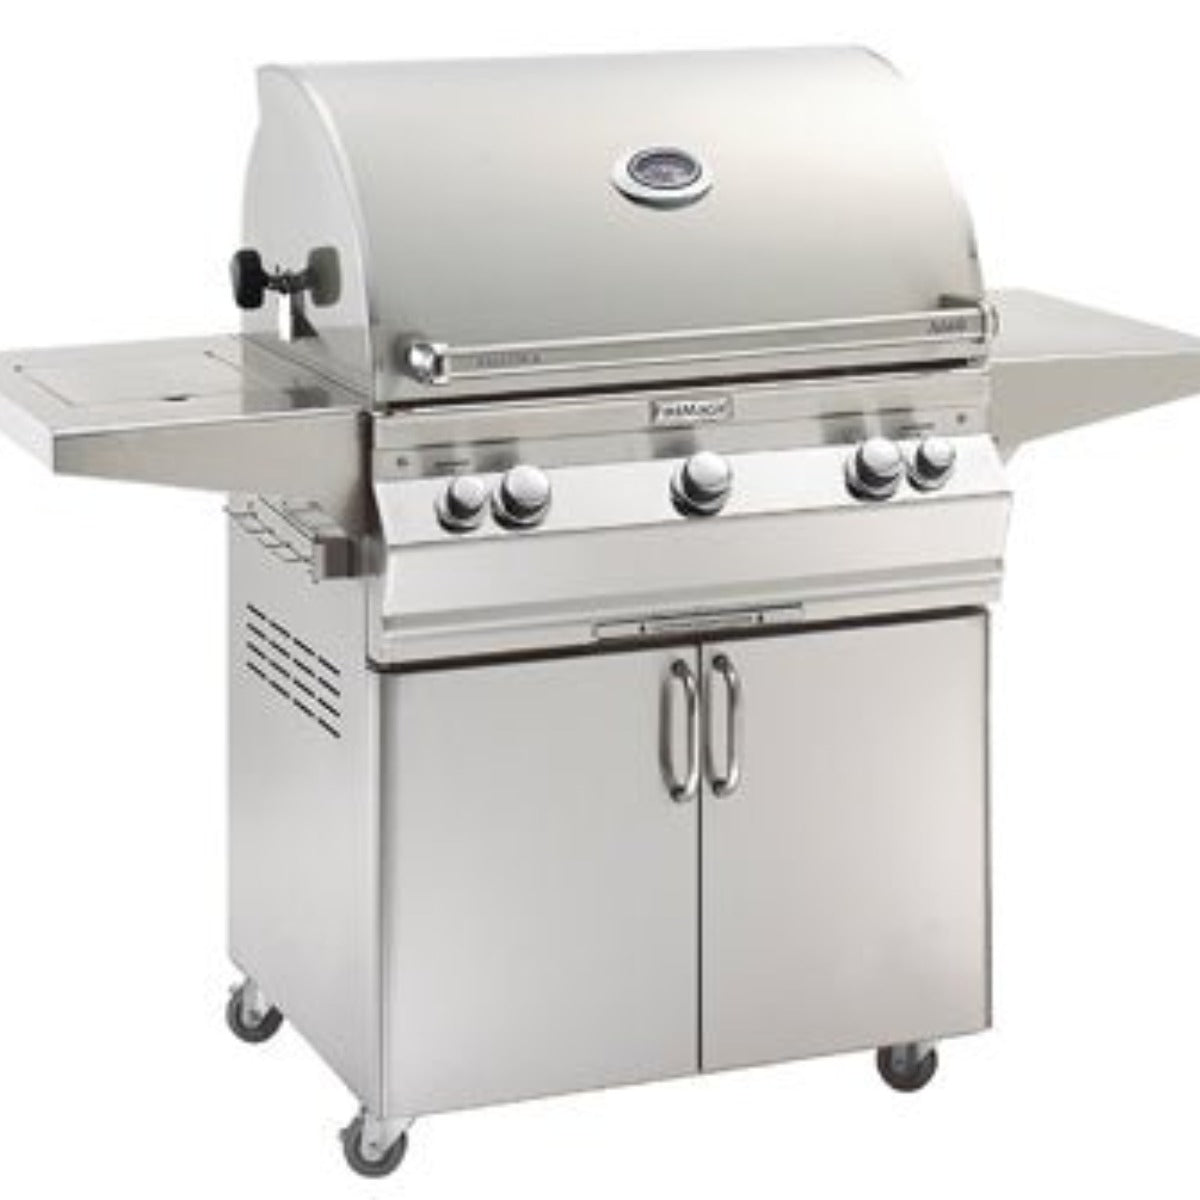 Fire Magic Grills Aurora A660s Portable Grill with Rotisserie Kit & Side Burner. High-quality outdoor grilling - Outdoorium